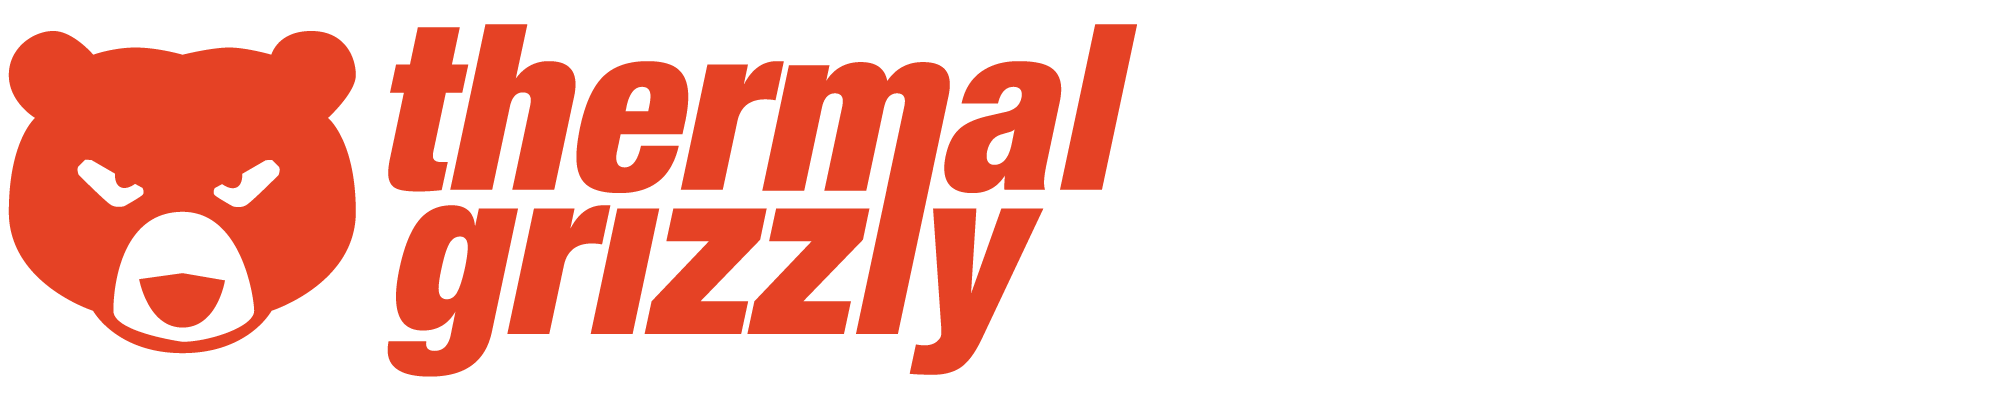 thermal-grizzly.com